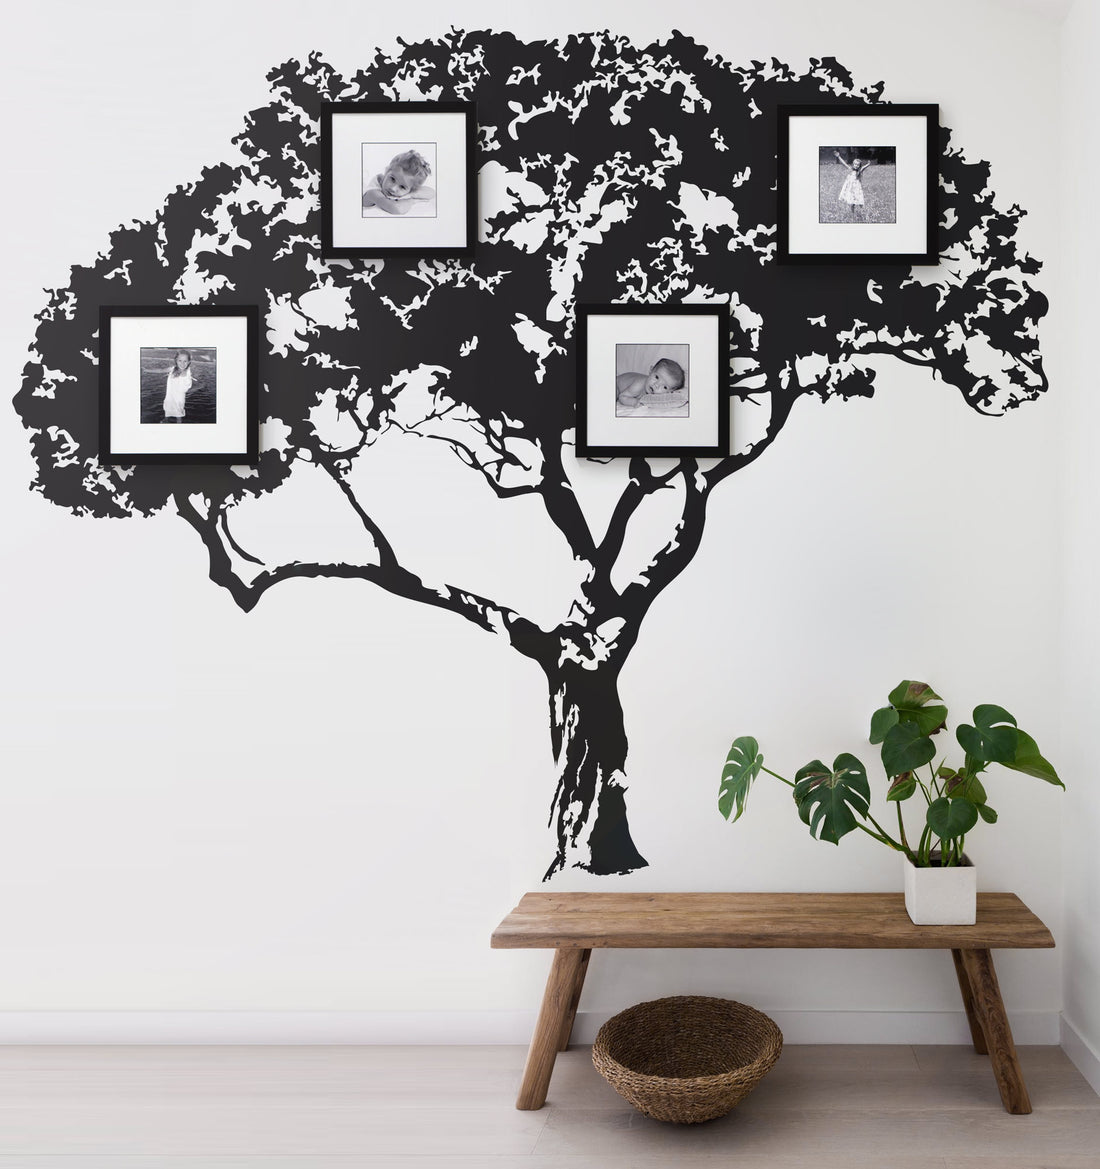 Pohutukawa Family Tree Wall Decal Your Decal Shop Wall Decal NZ